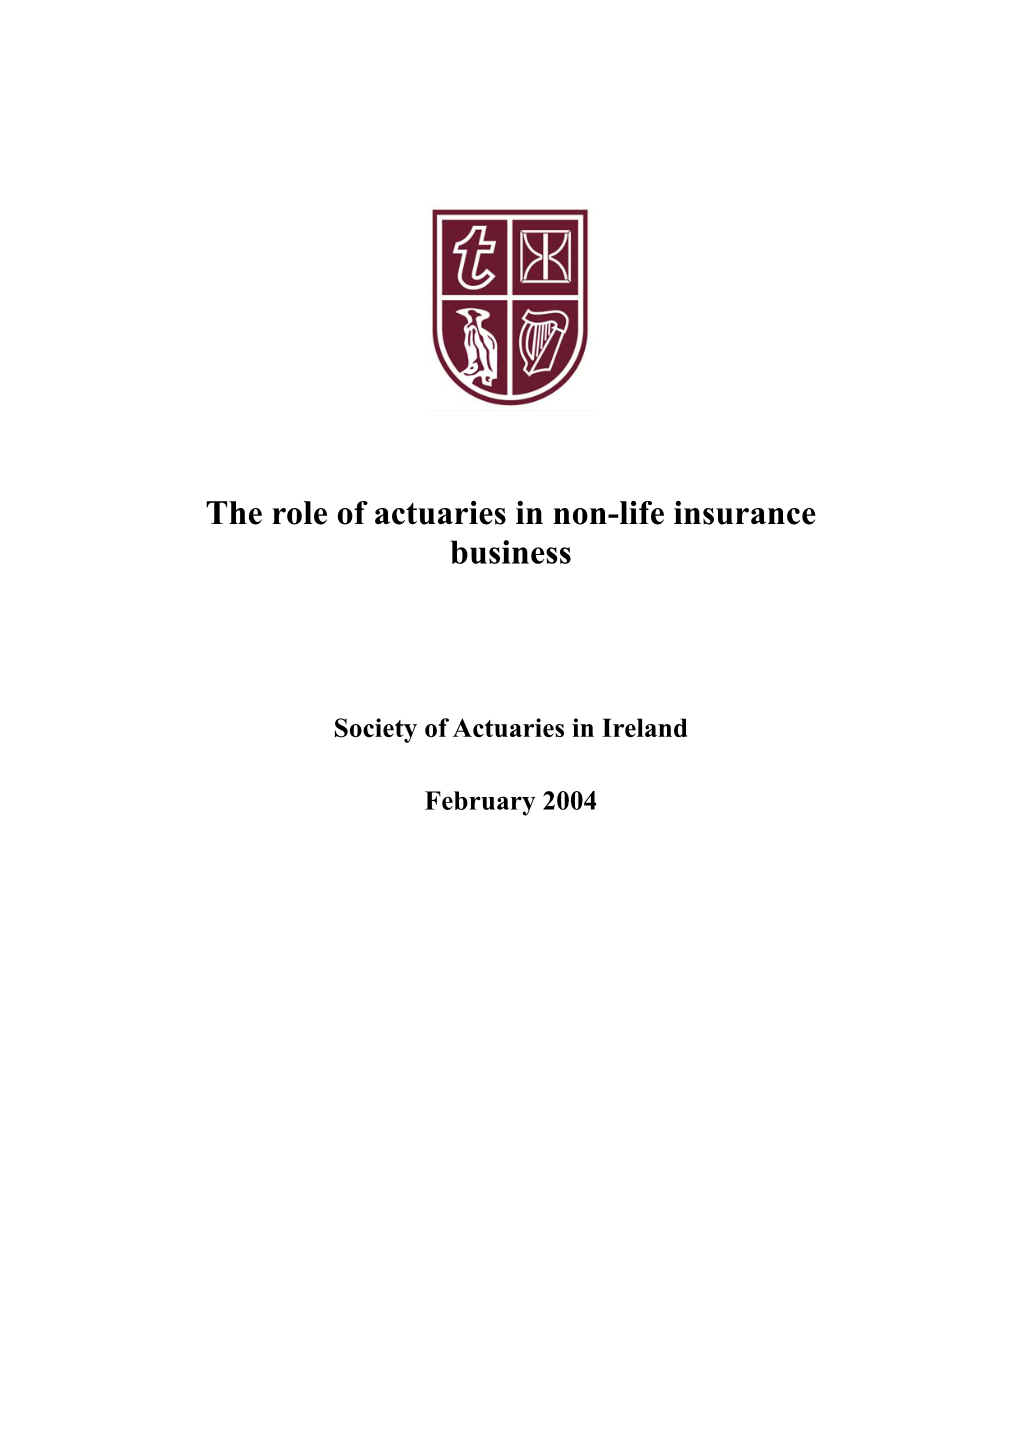 The Role of Actuaries in Non-Life Insurance Business